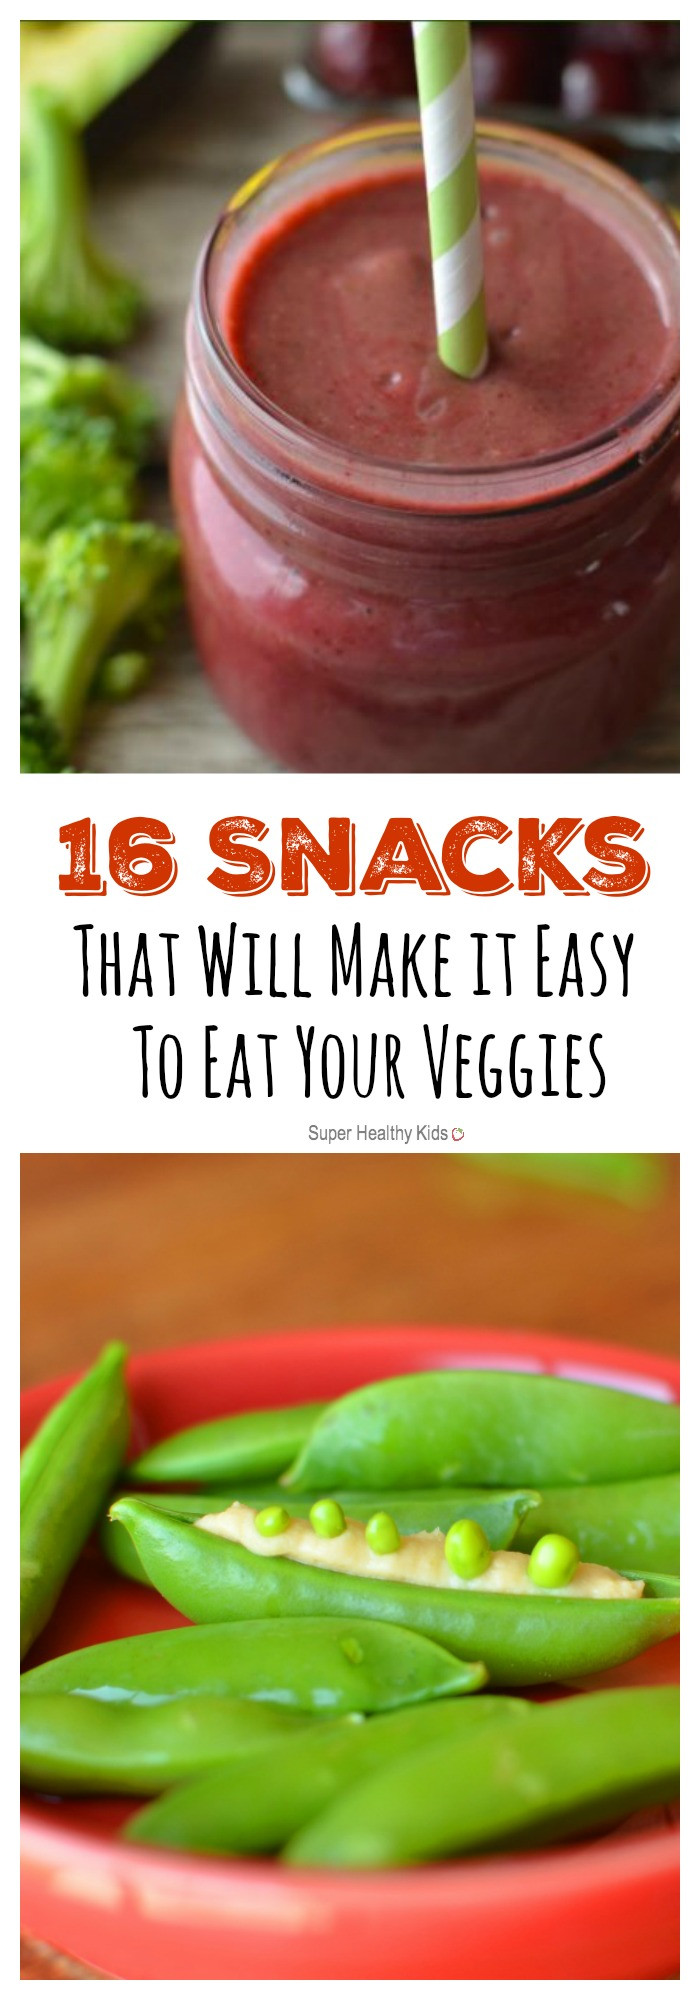 Healthy Vegetable Snacks
 16 Snacks That Will Make it Easy To Eat Your Veggies